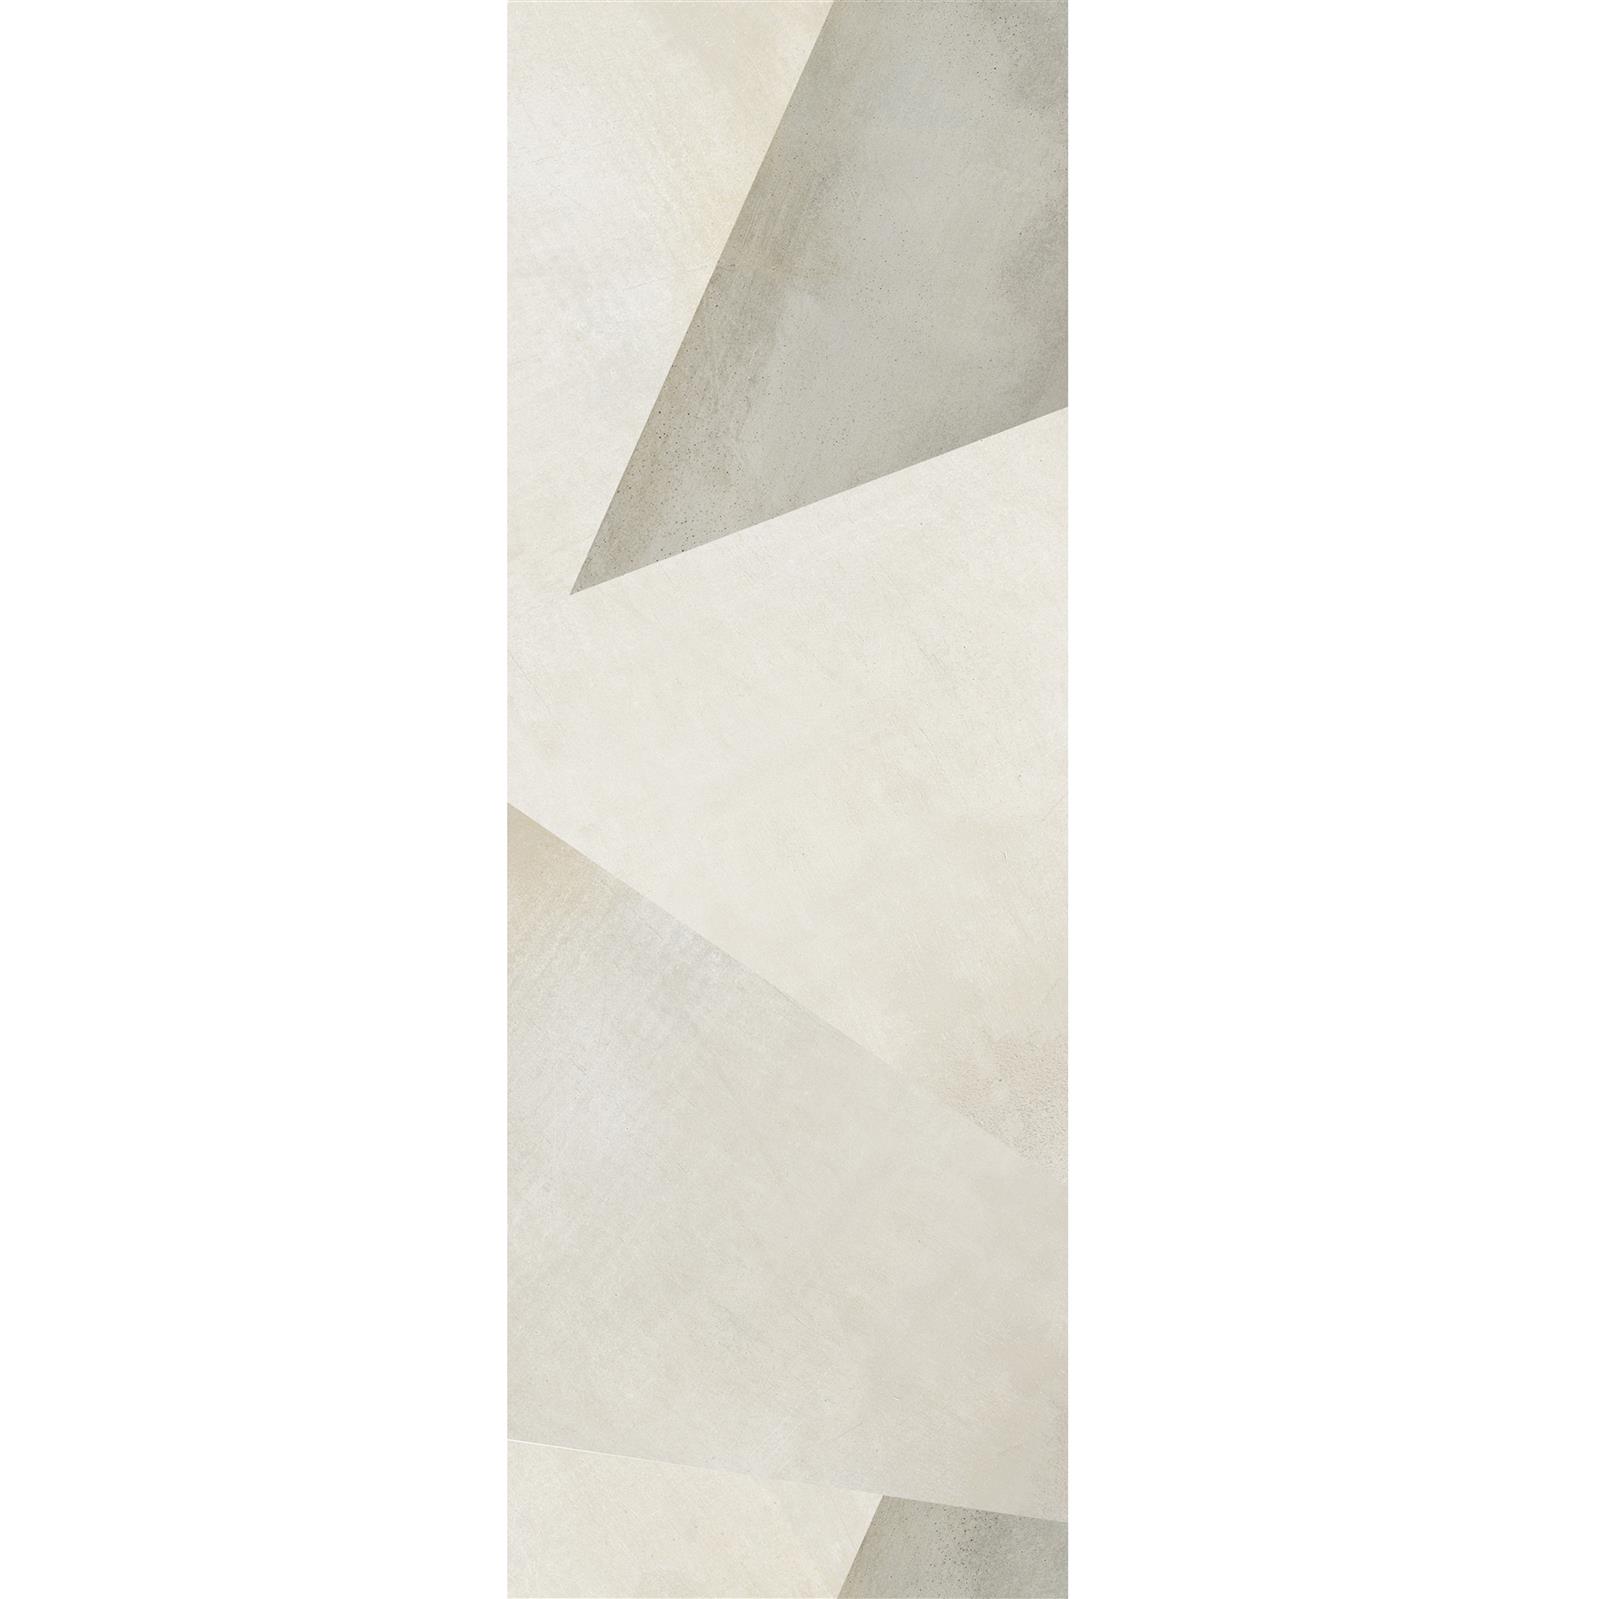 Wall Tiles Queens Rectified Sand Decor 7 30x90cm